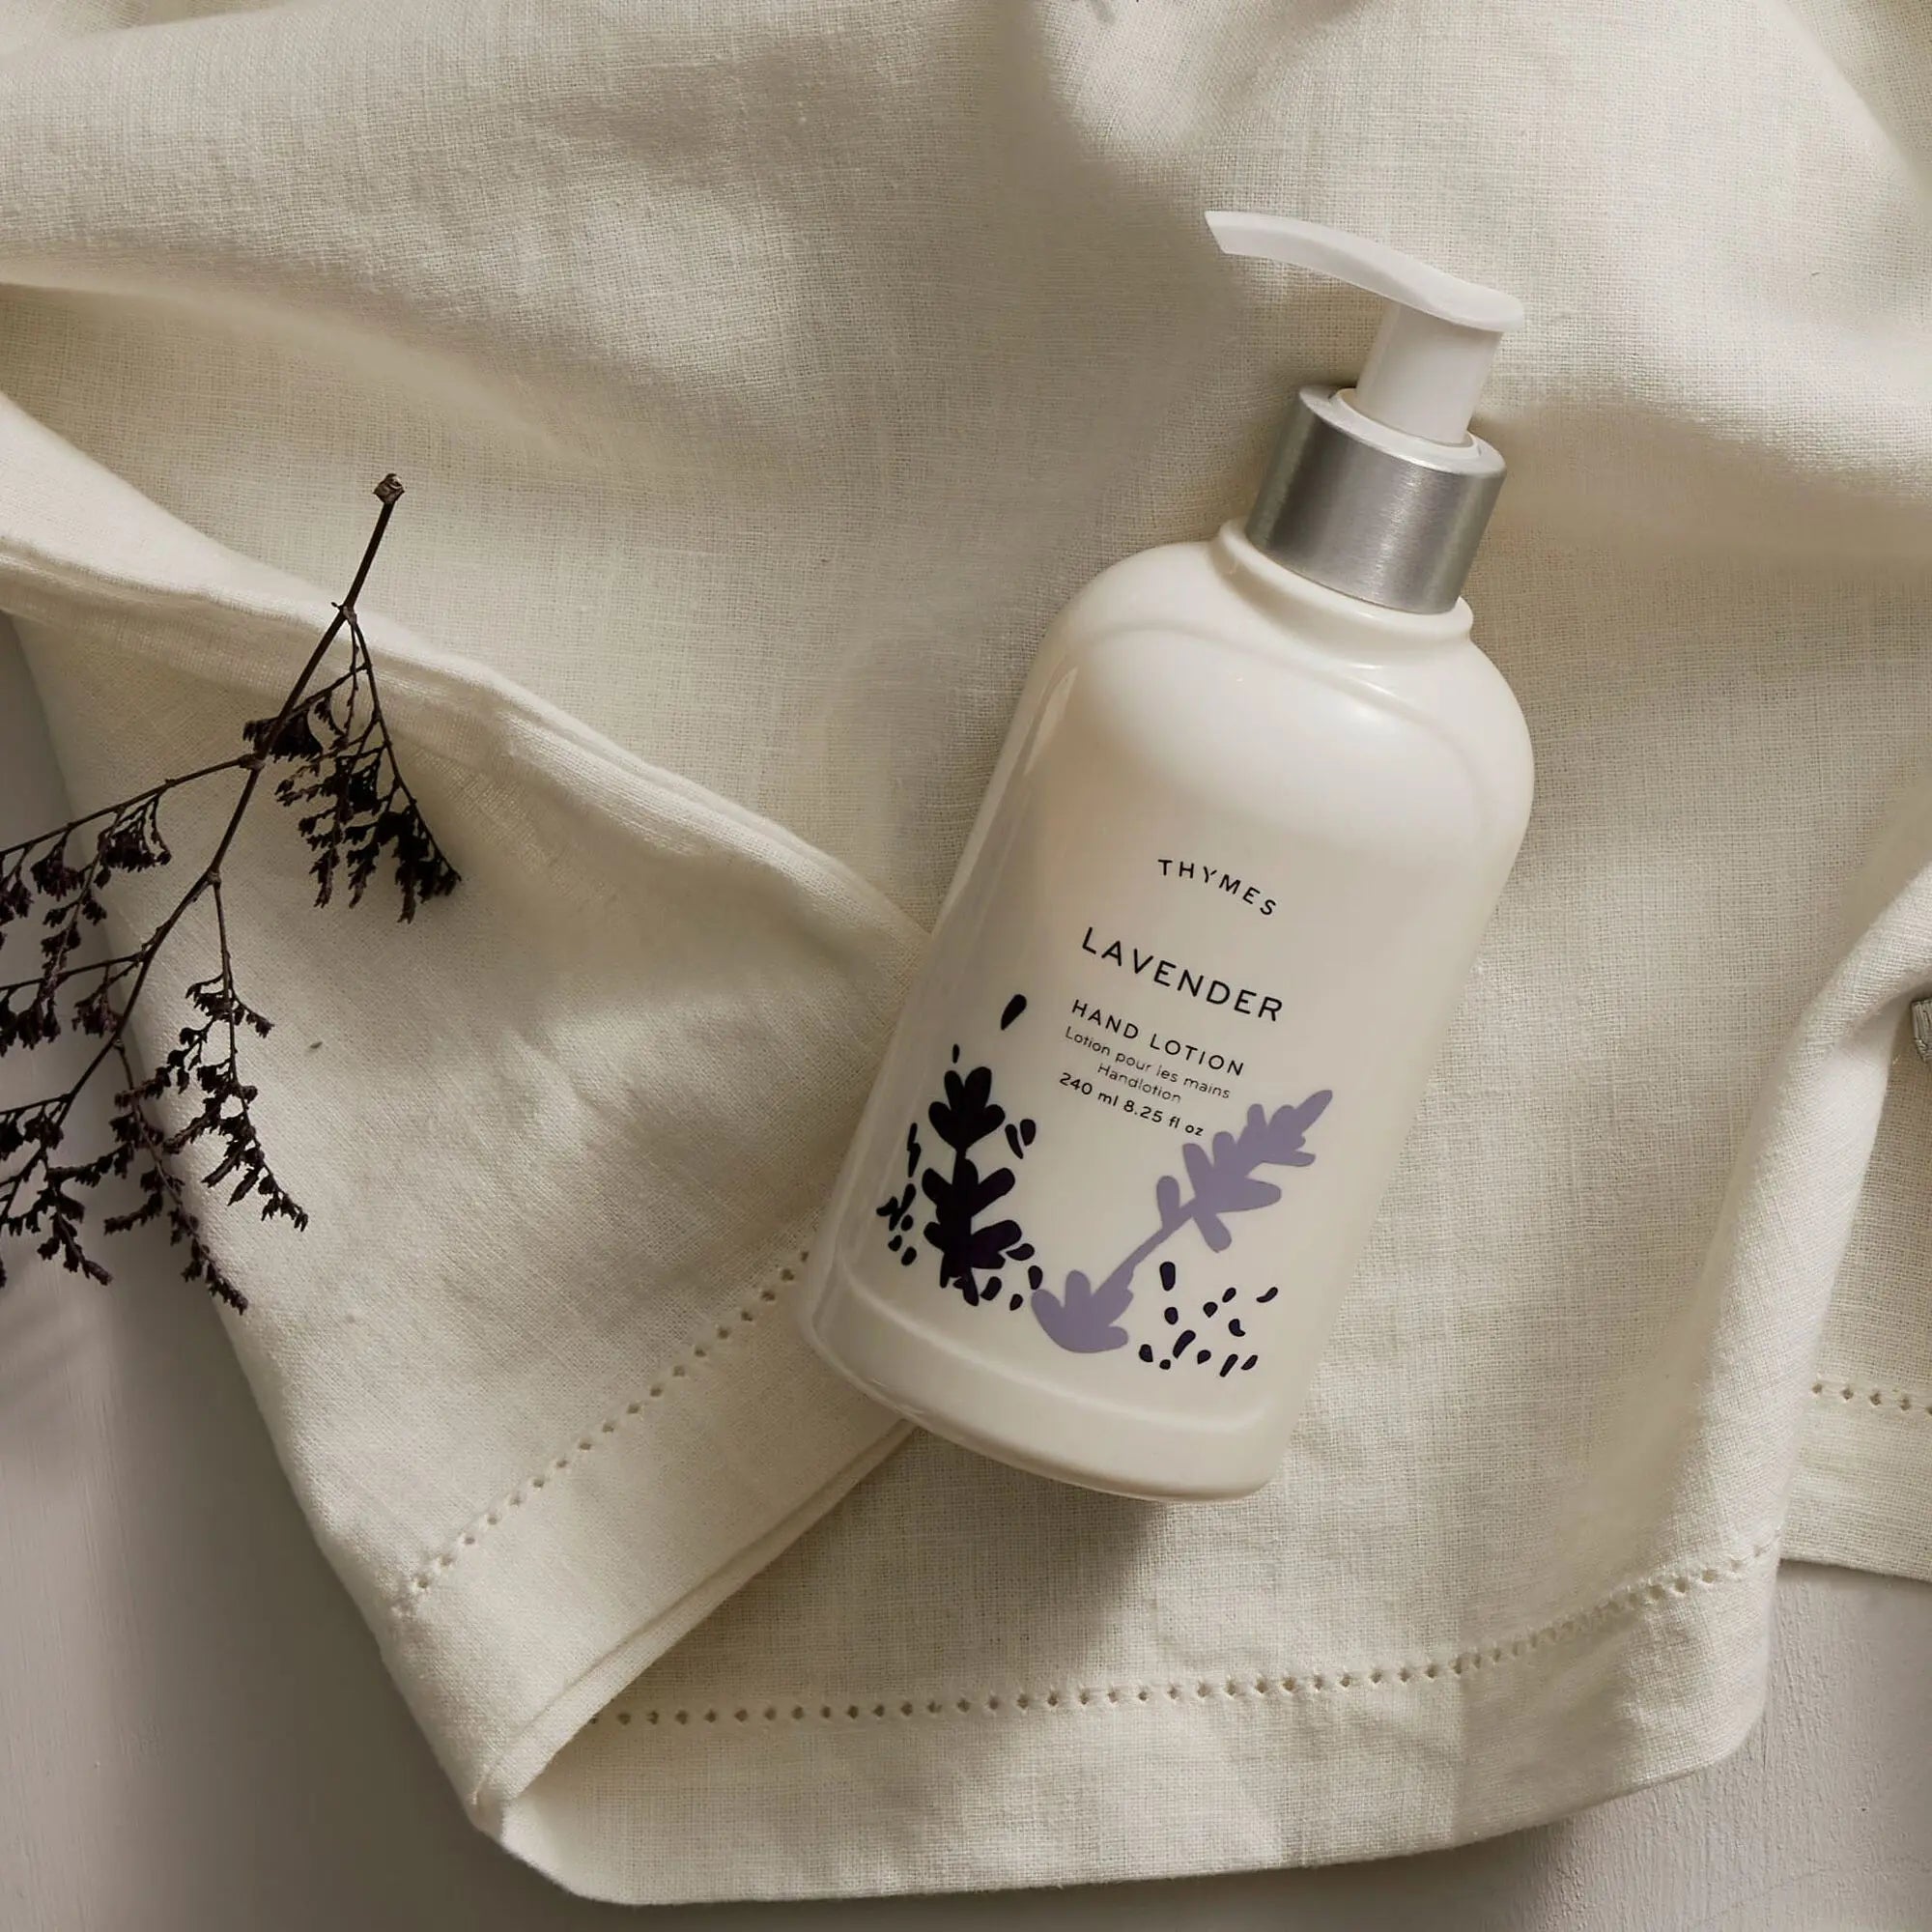 Thymes Lavender Hand Lotion 240 milliliter 8.25 fluid ounce laid on fabric with lavender